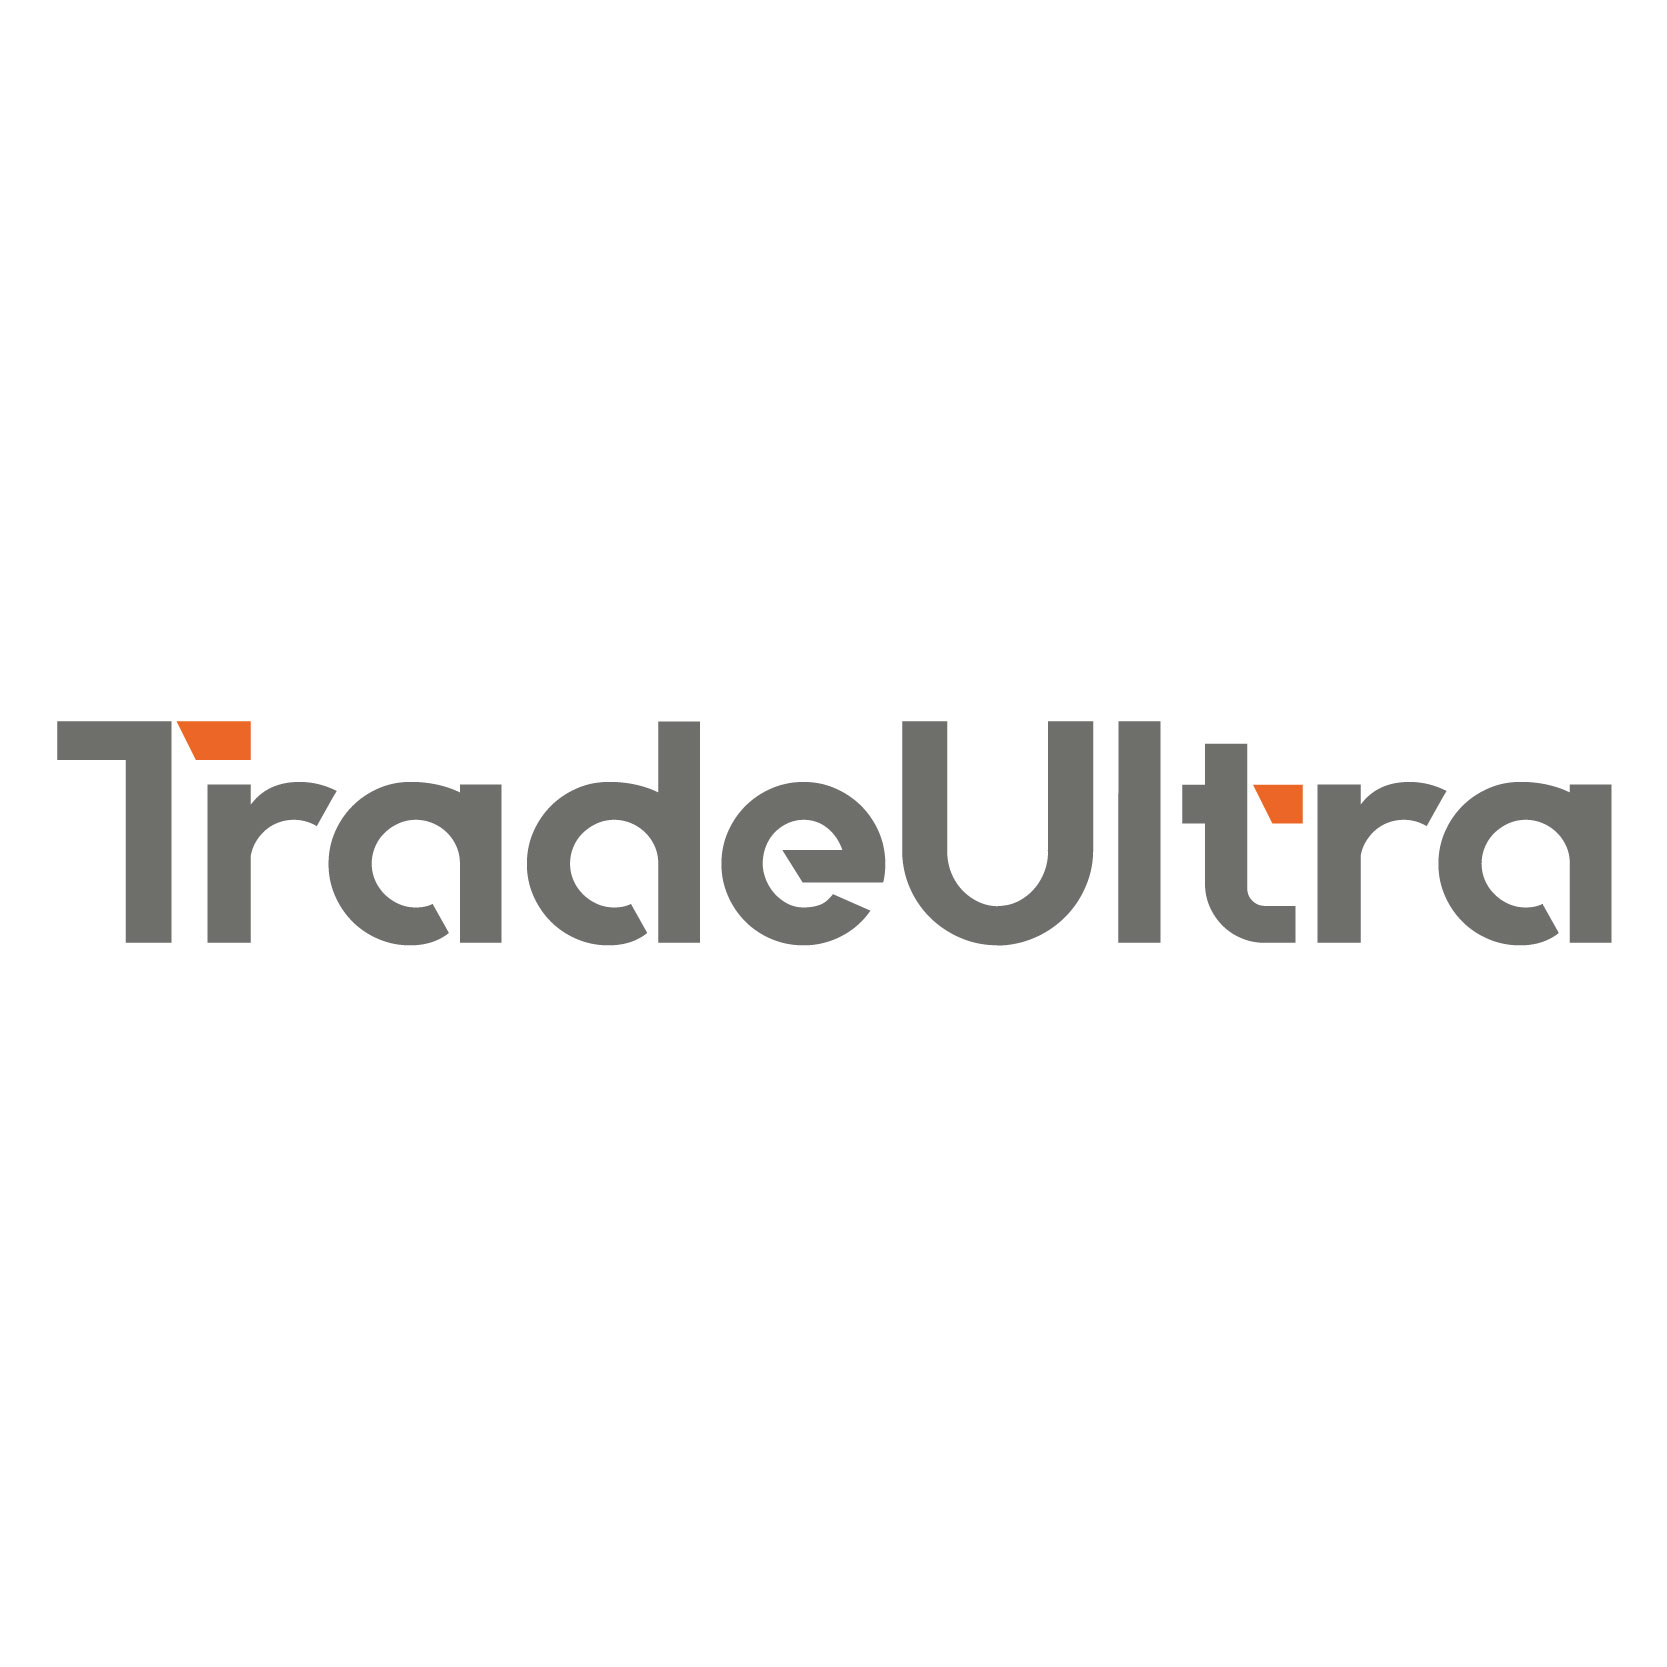 TRADEULTRA	